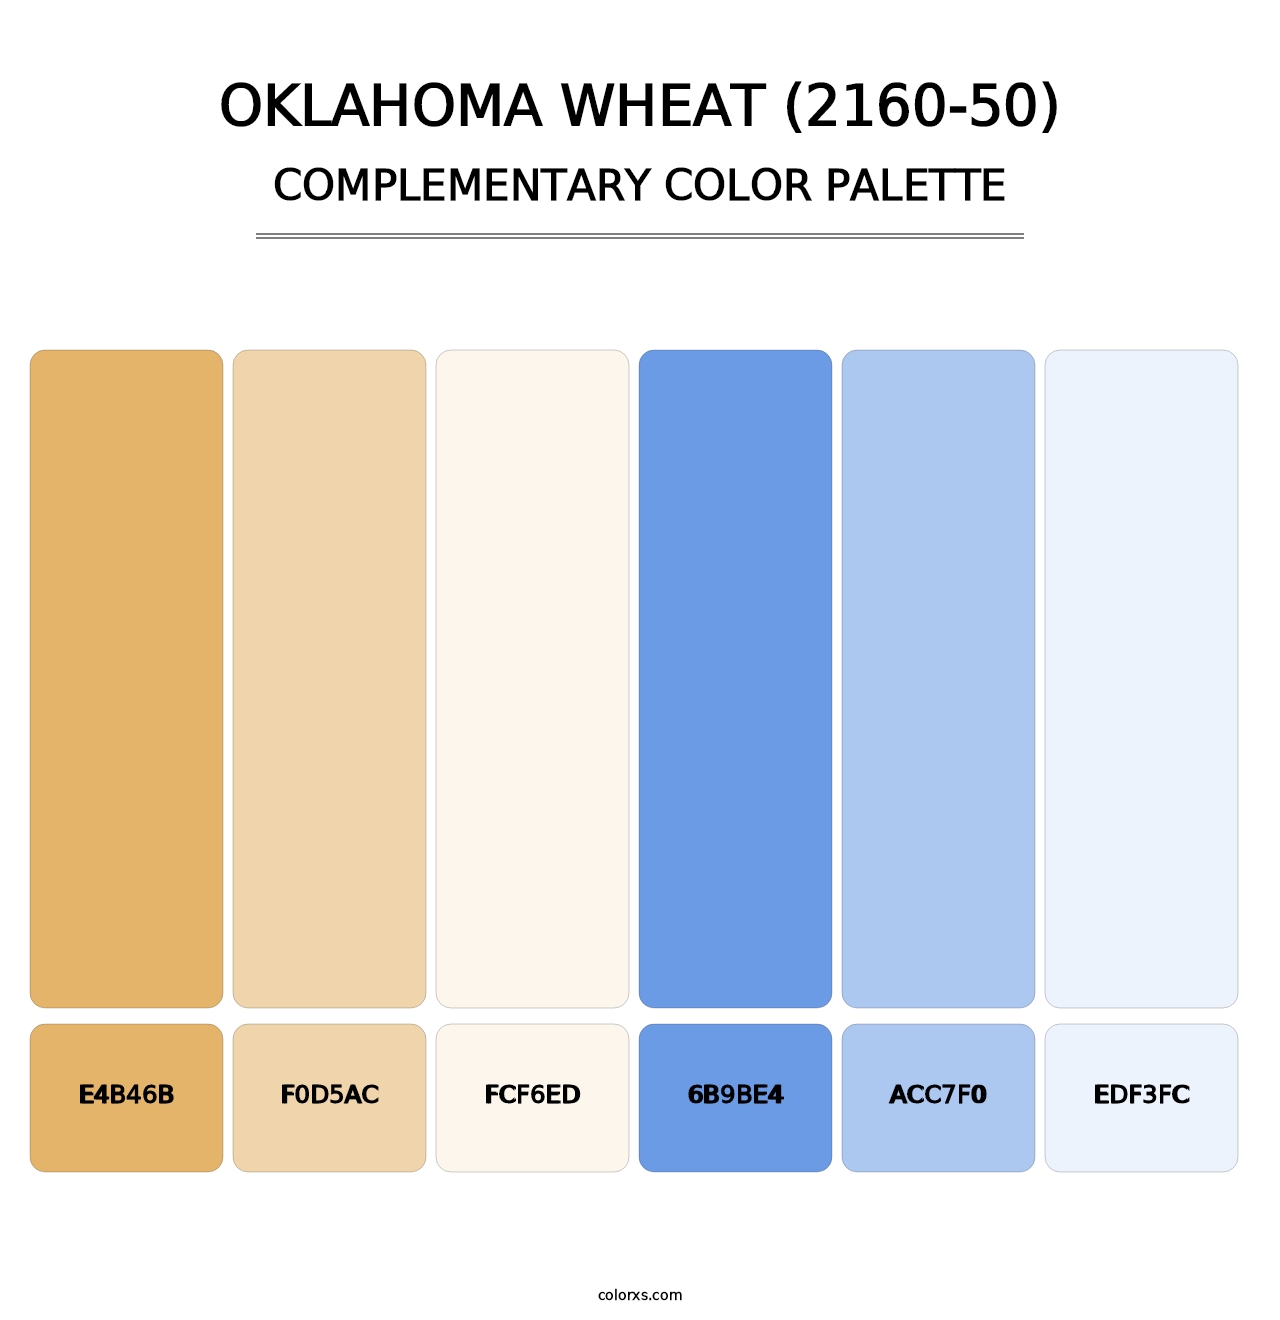 Oklahoma Wheat (2160-50) - Complementary Color Palette